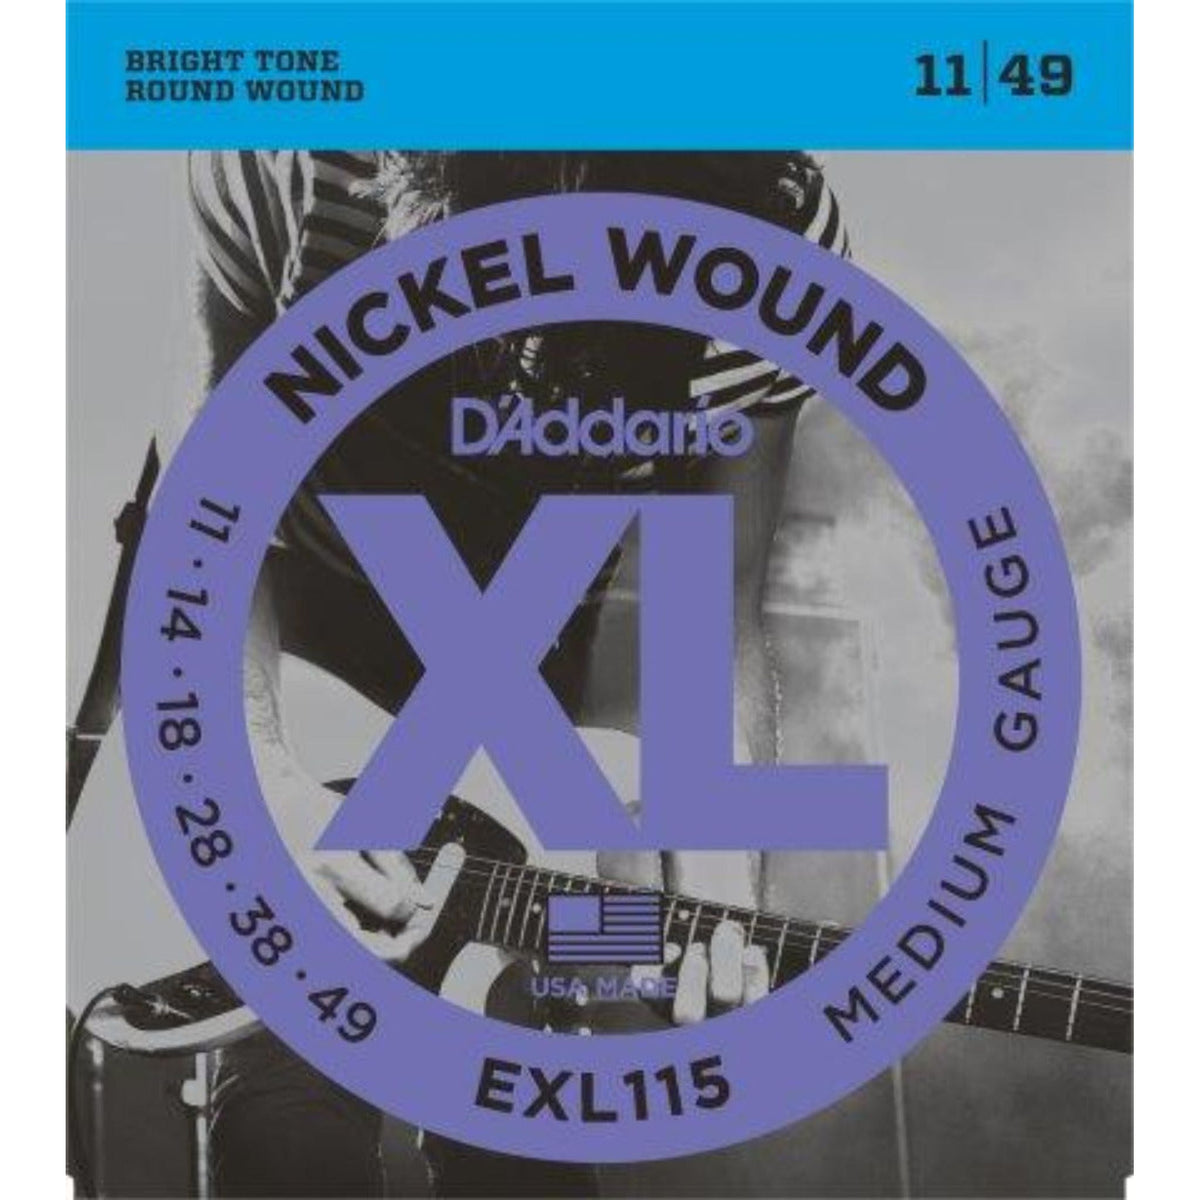 D&#39;Addario EXL115 Electric Guitar String are the popular choice for players who prefer moderate flexibility and a full, beefy tone.